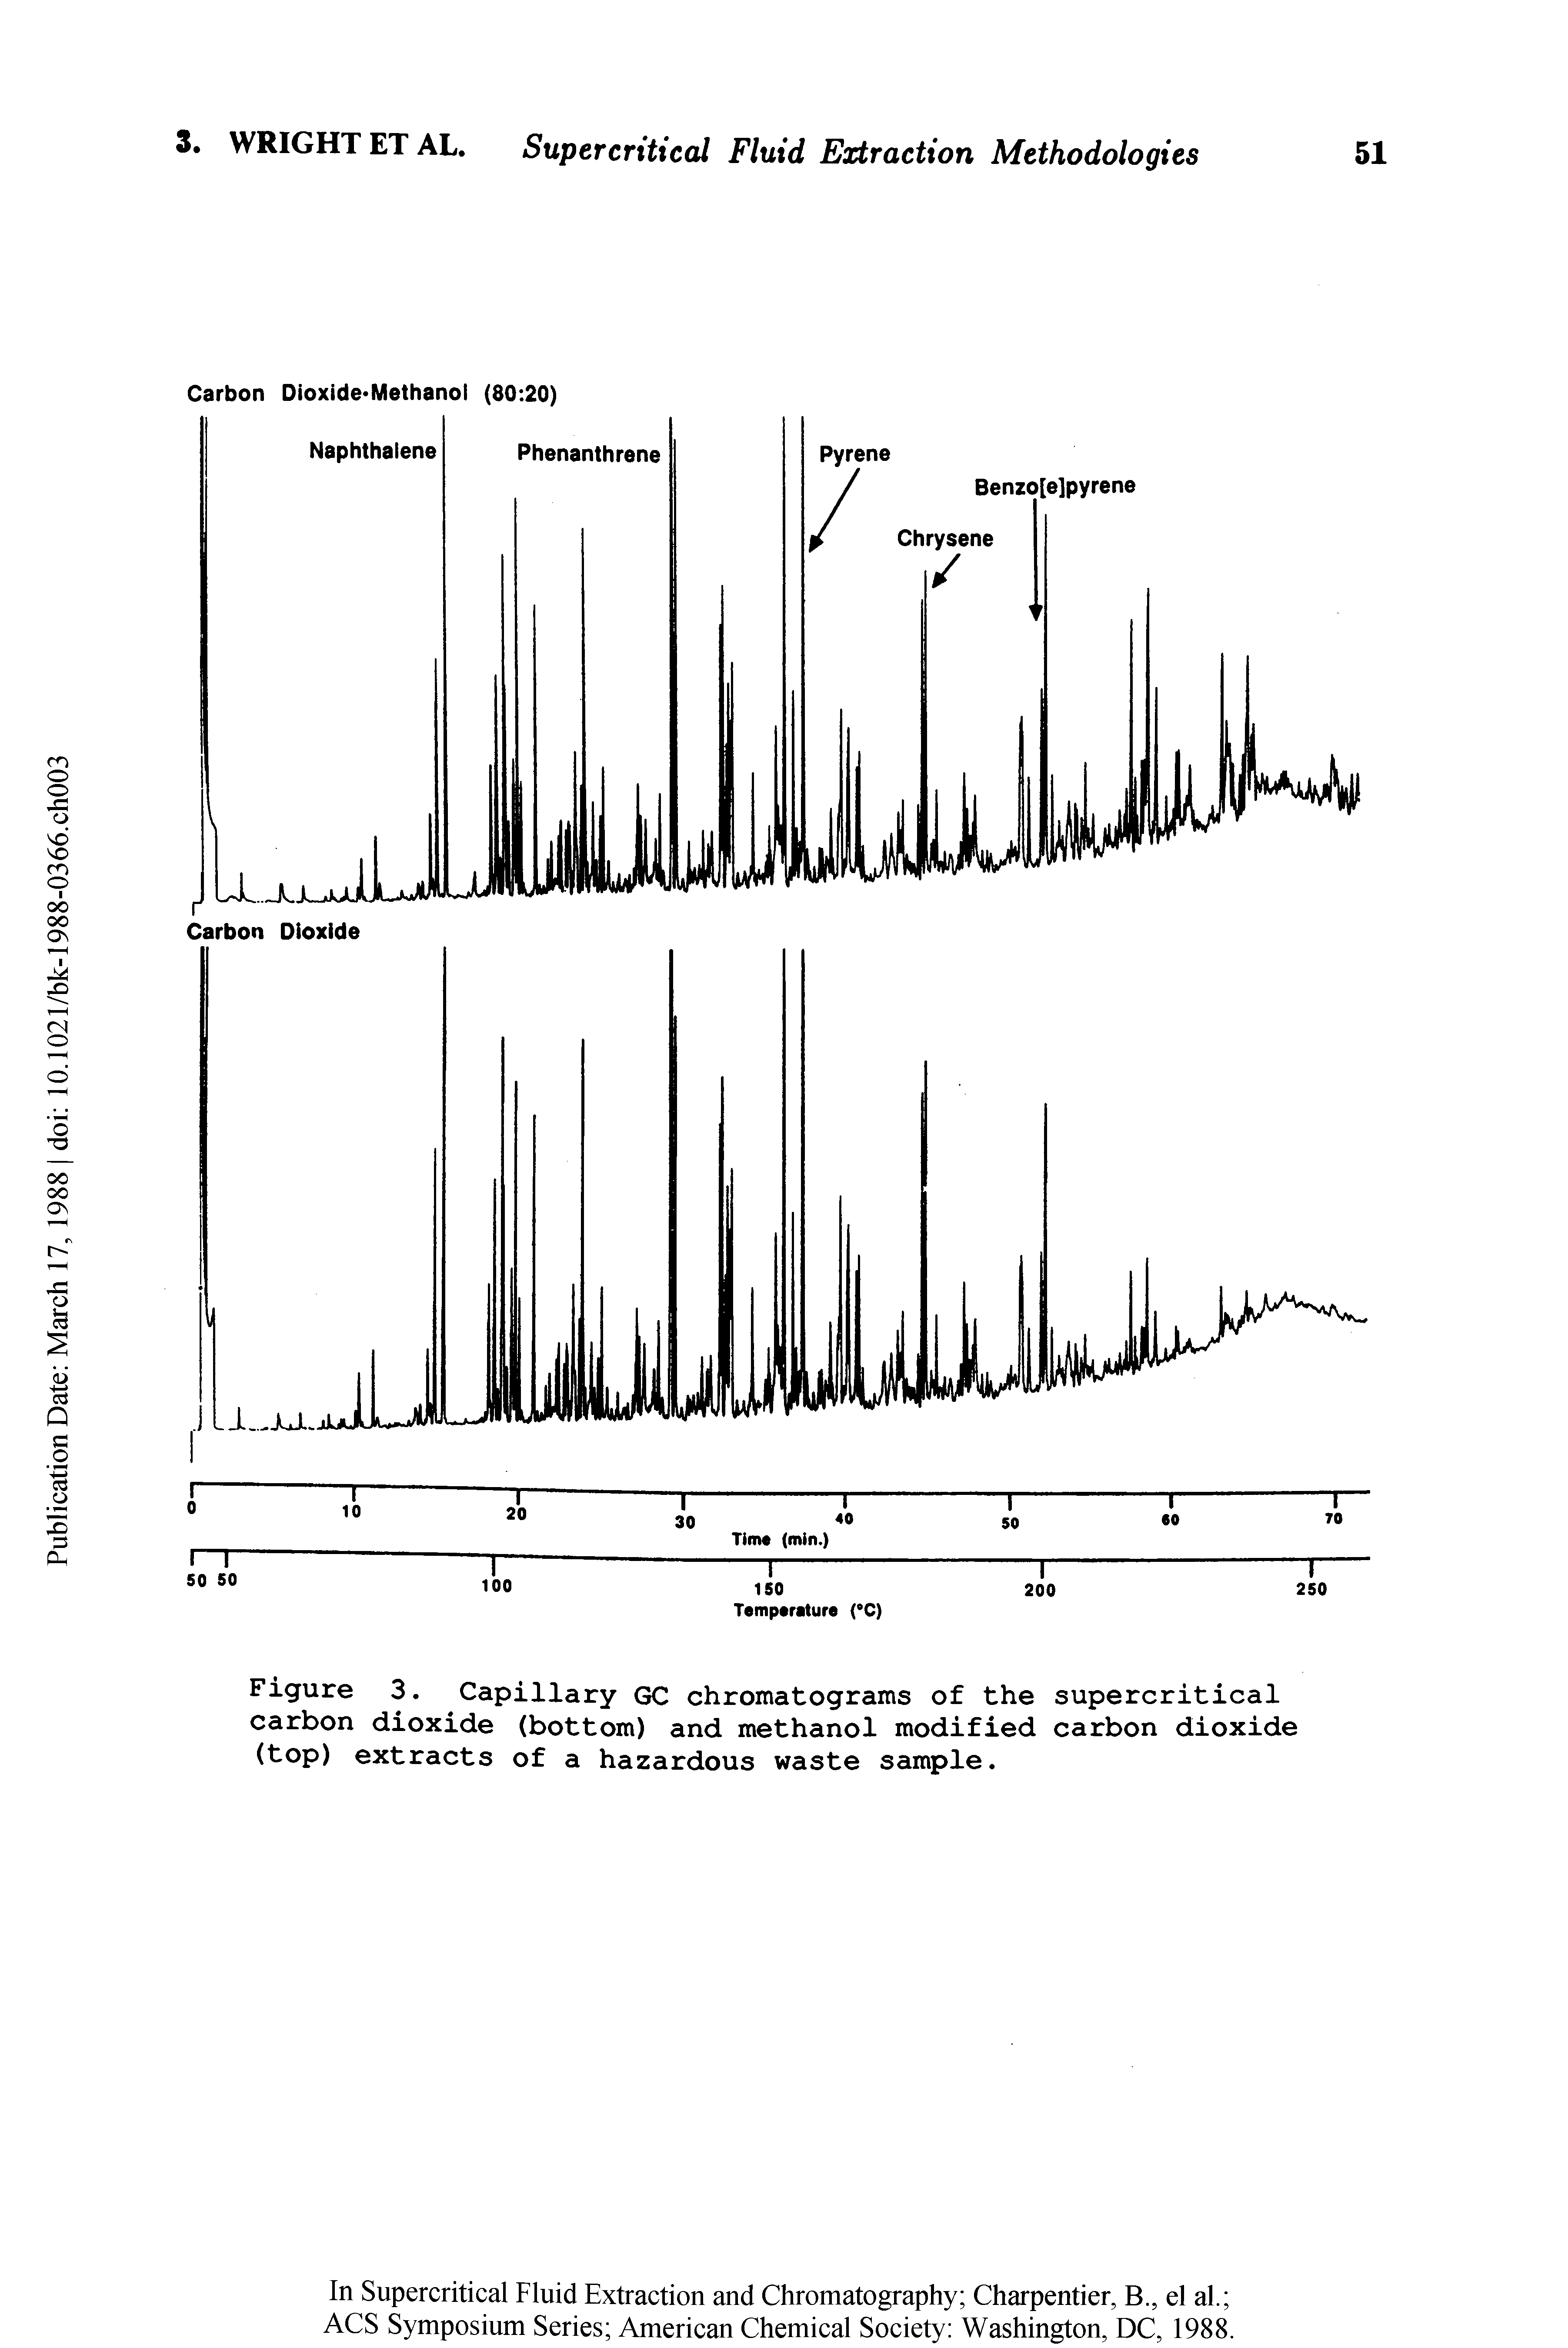 Figure 3. Capillary GC chromatograms of the supercritical carbon dioxide (bottom) and methanol modified carbon dioxide (top) extracts of a hazardous waste sample.